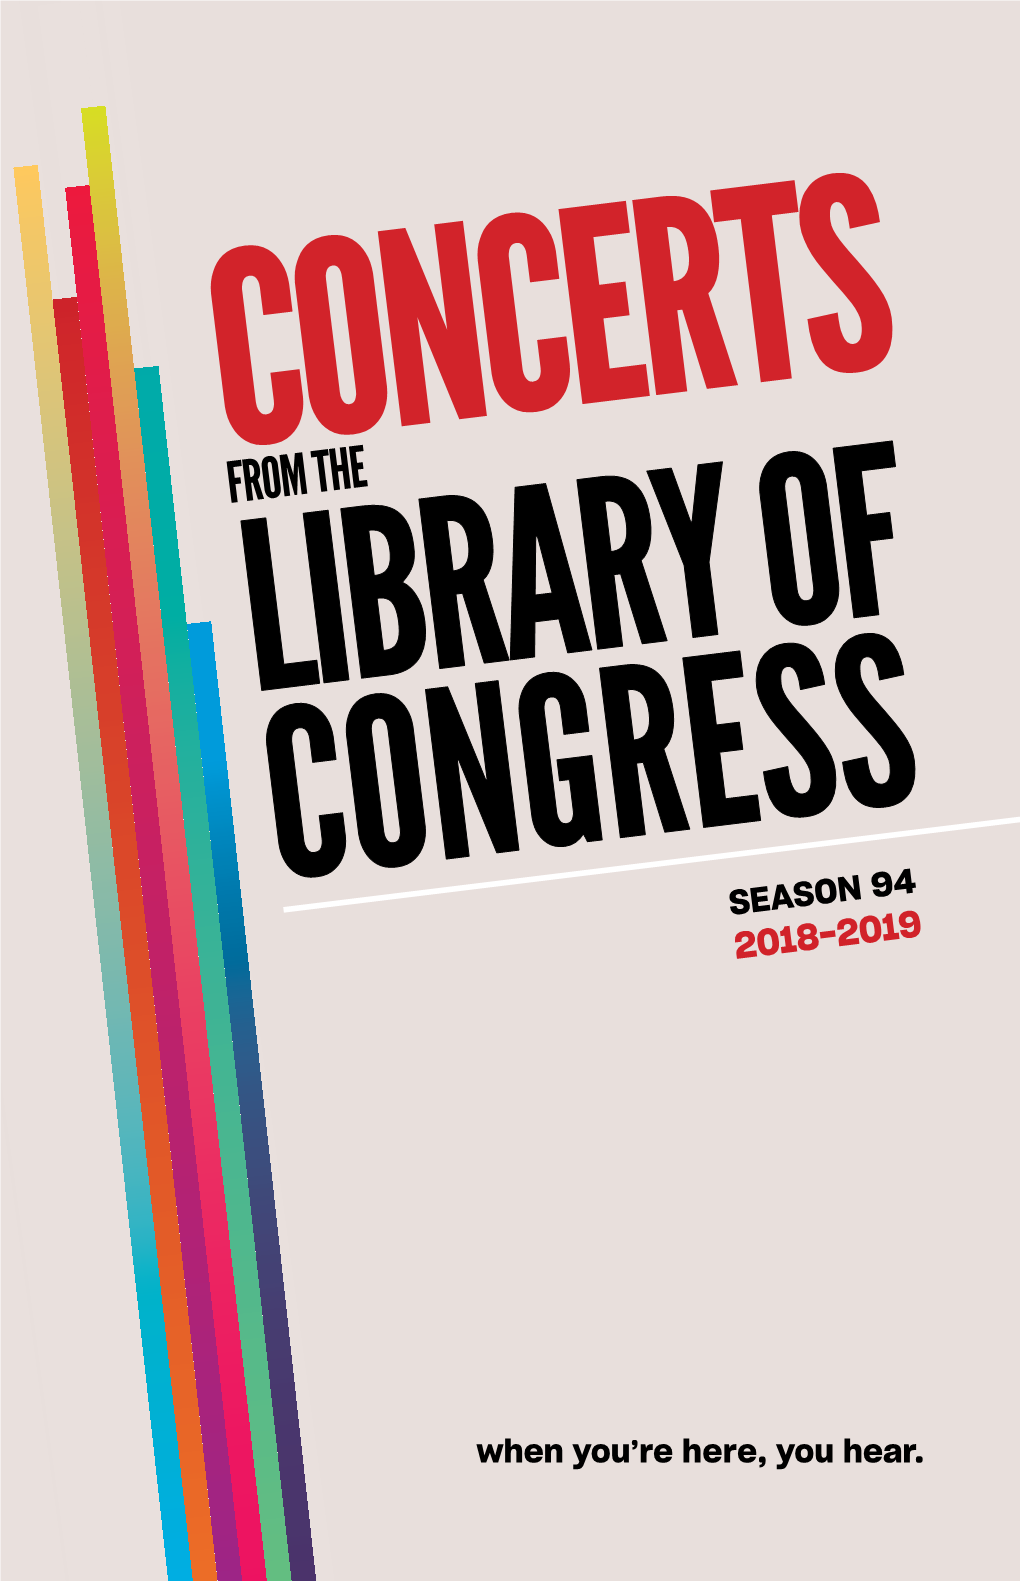 Concerts from the Library of Congress: Season 94, 2018-2019